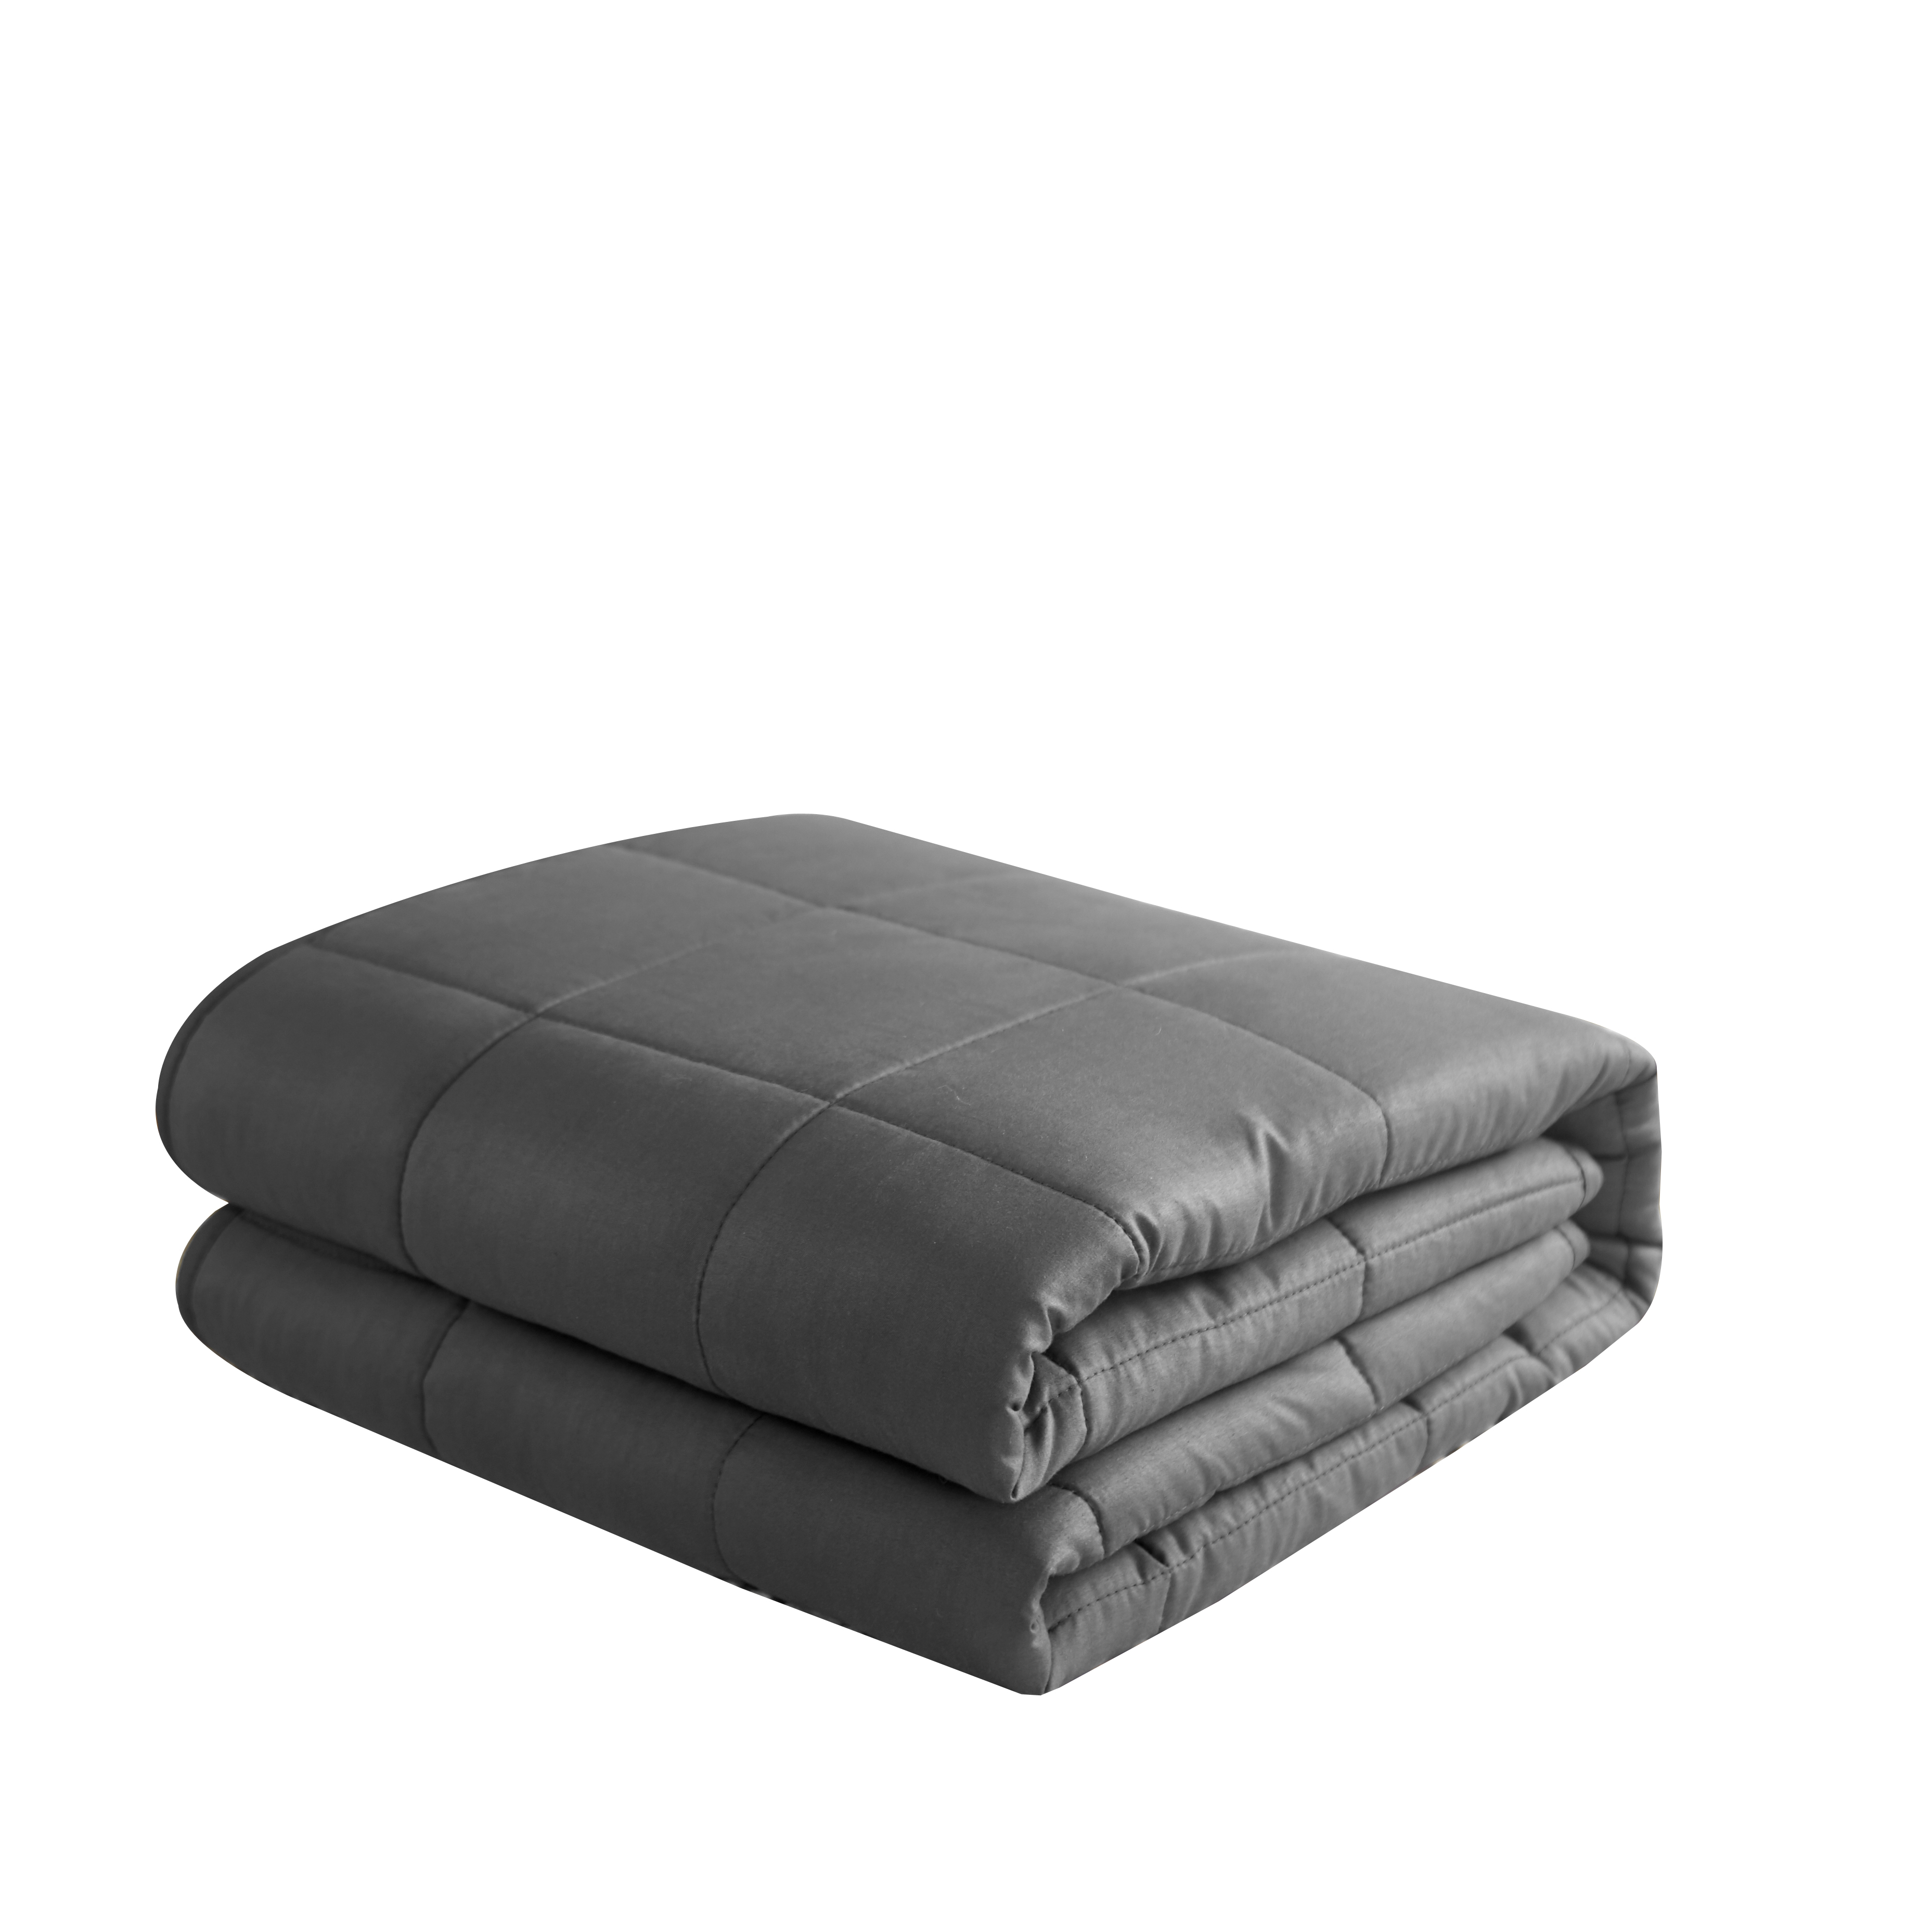 Well Being 20lb Soft Weighted Blanket, Queen, Gray - image 1 of 10